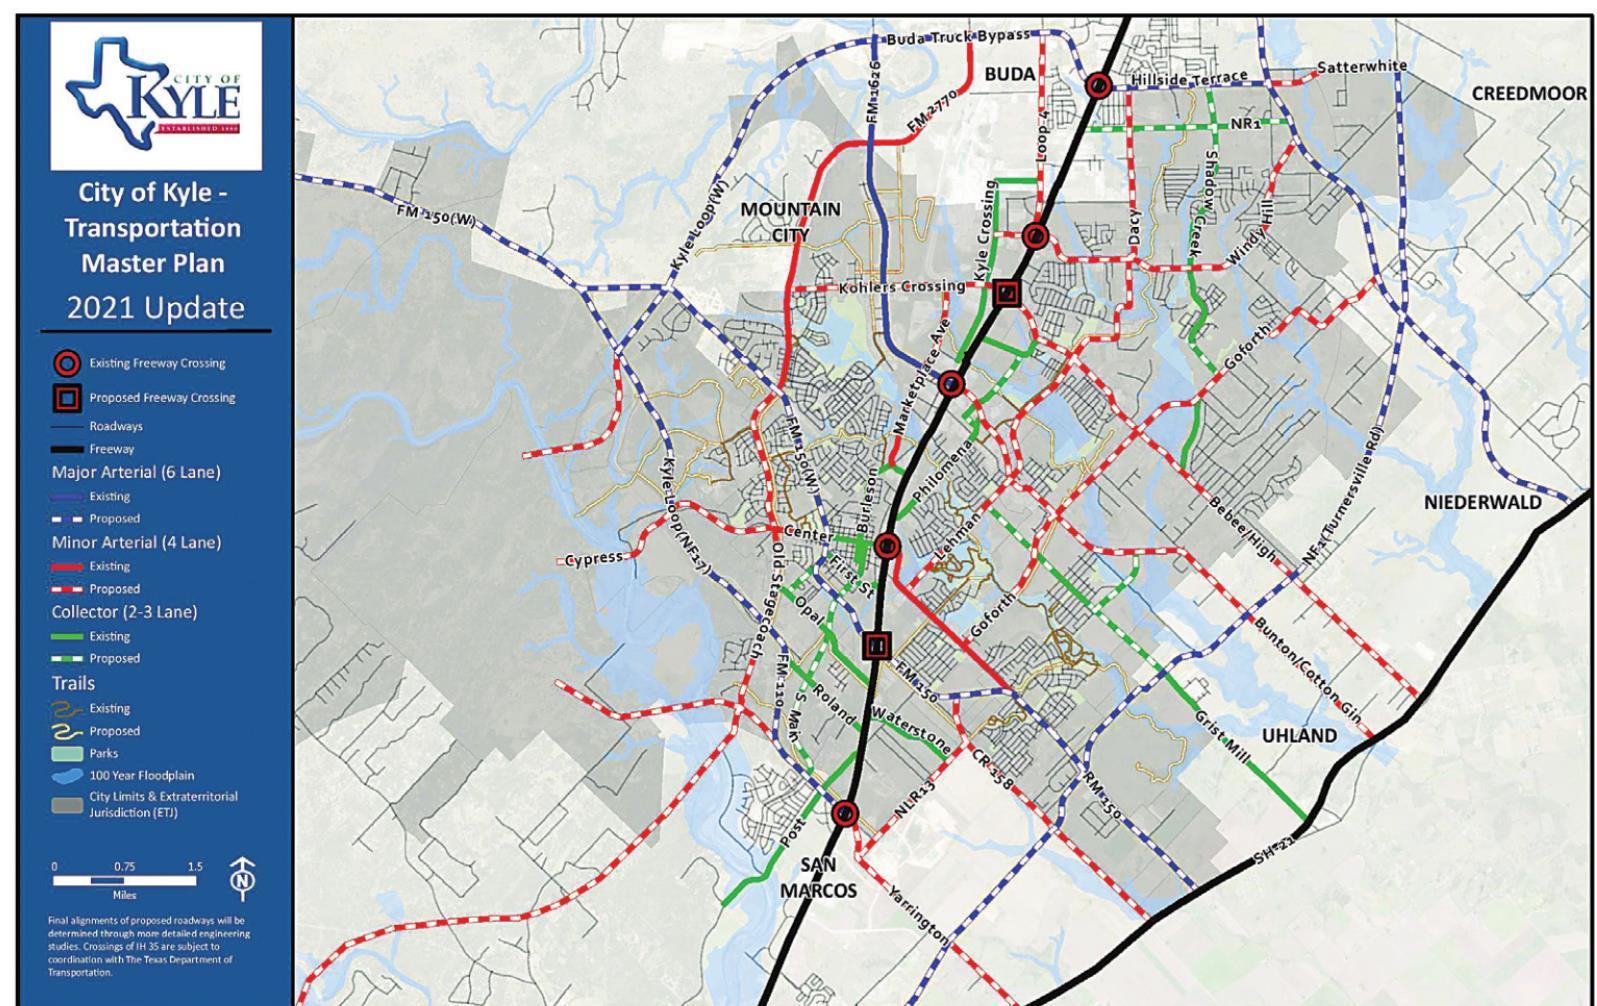 Kyle City Council approves updated Transportation Master Plan